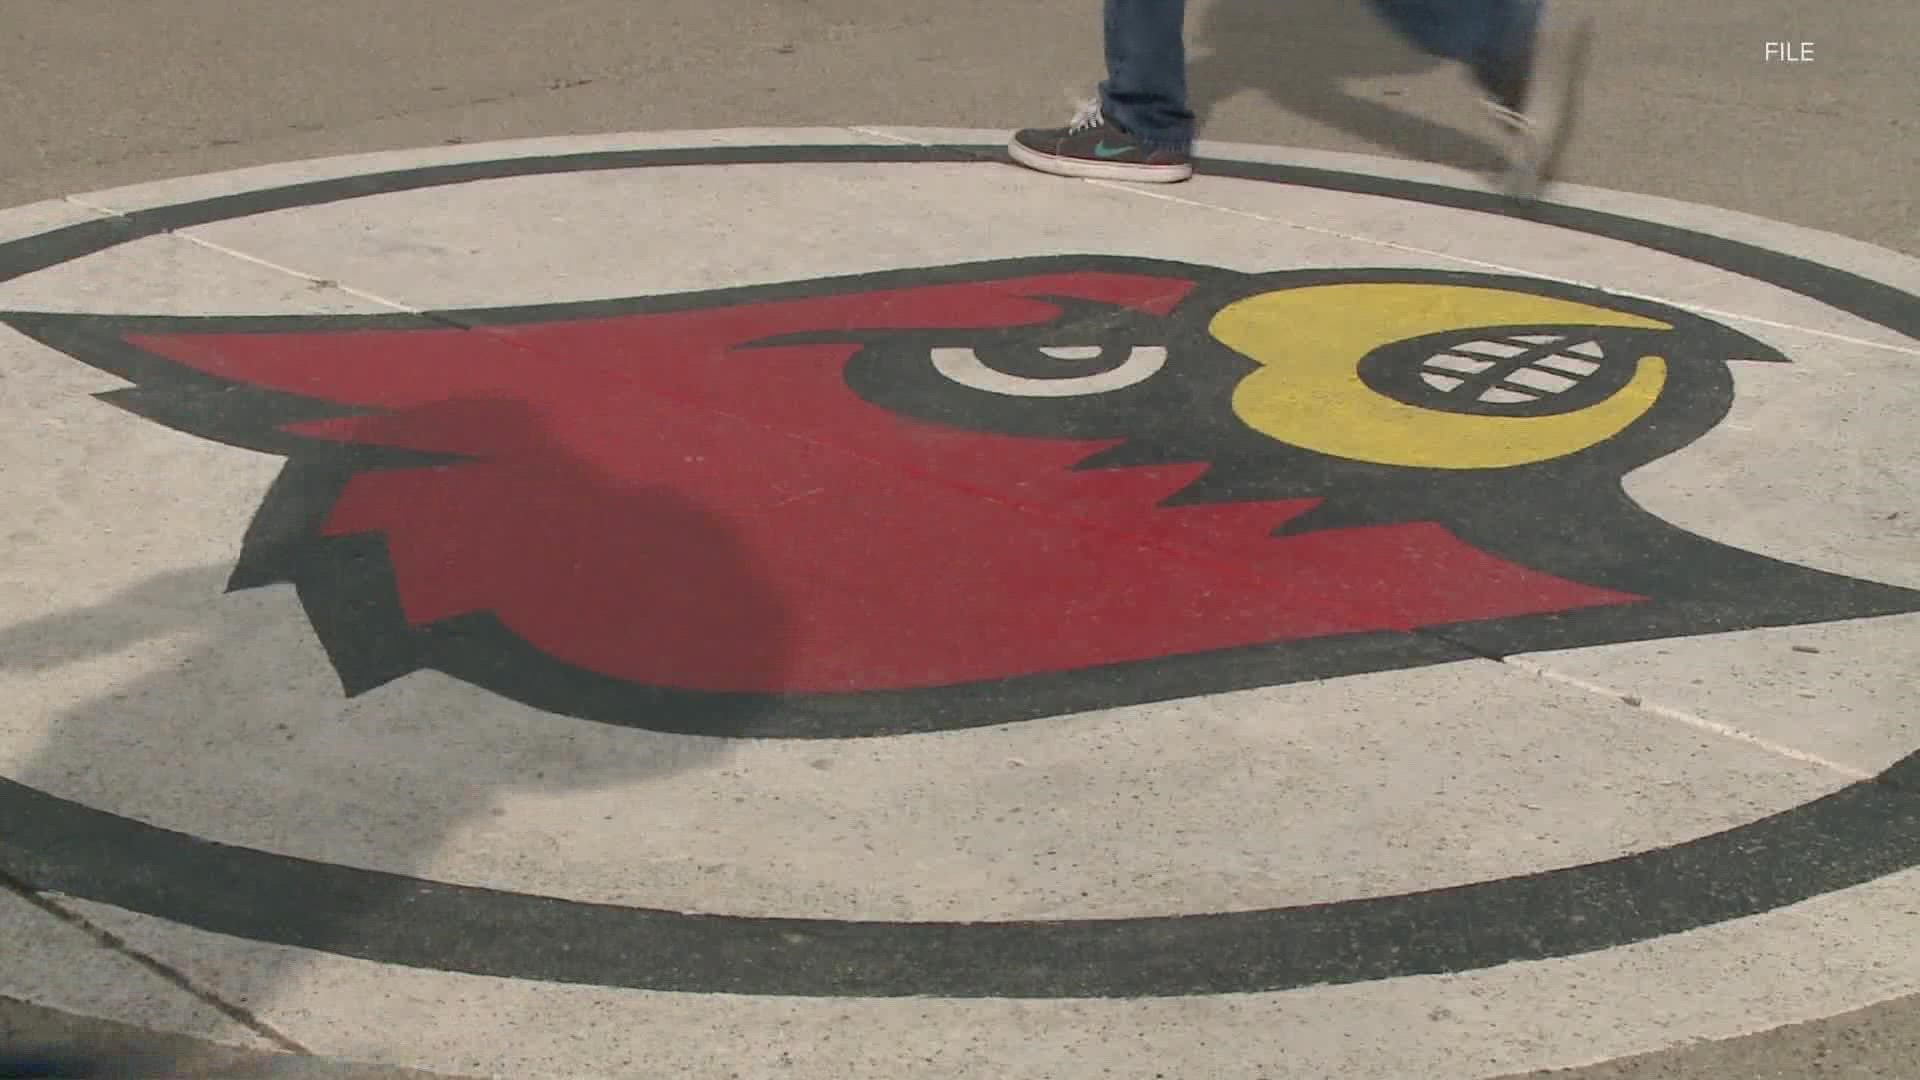 The lawsuit says state law requires licensees to graduate from regionally accredited institutions, which the University of Louisville is.